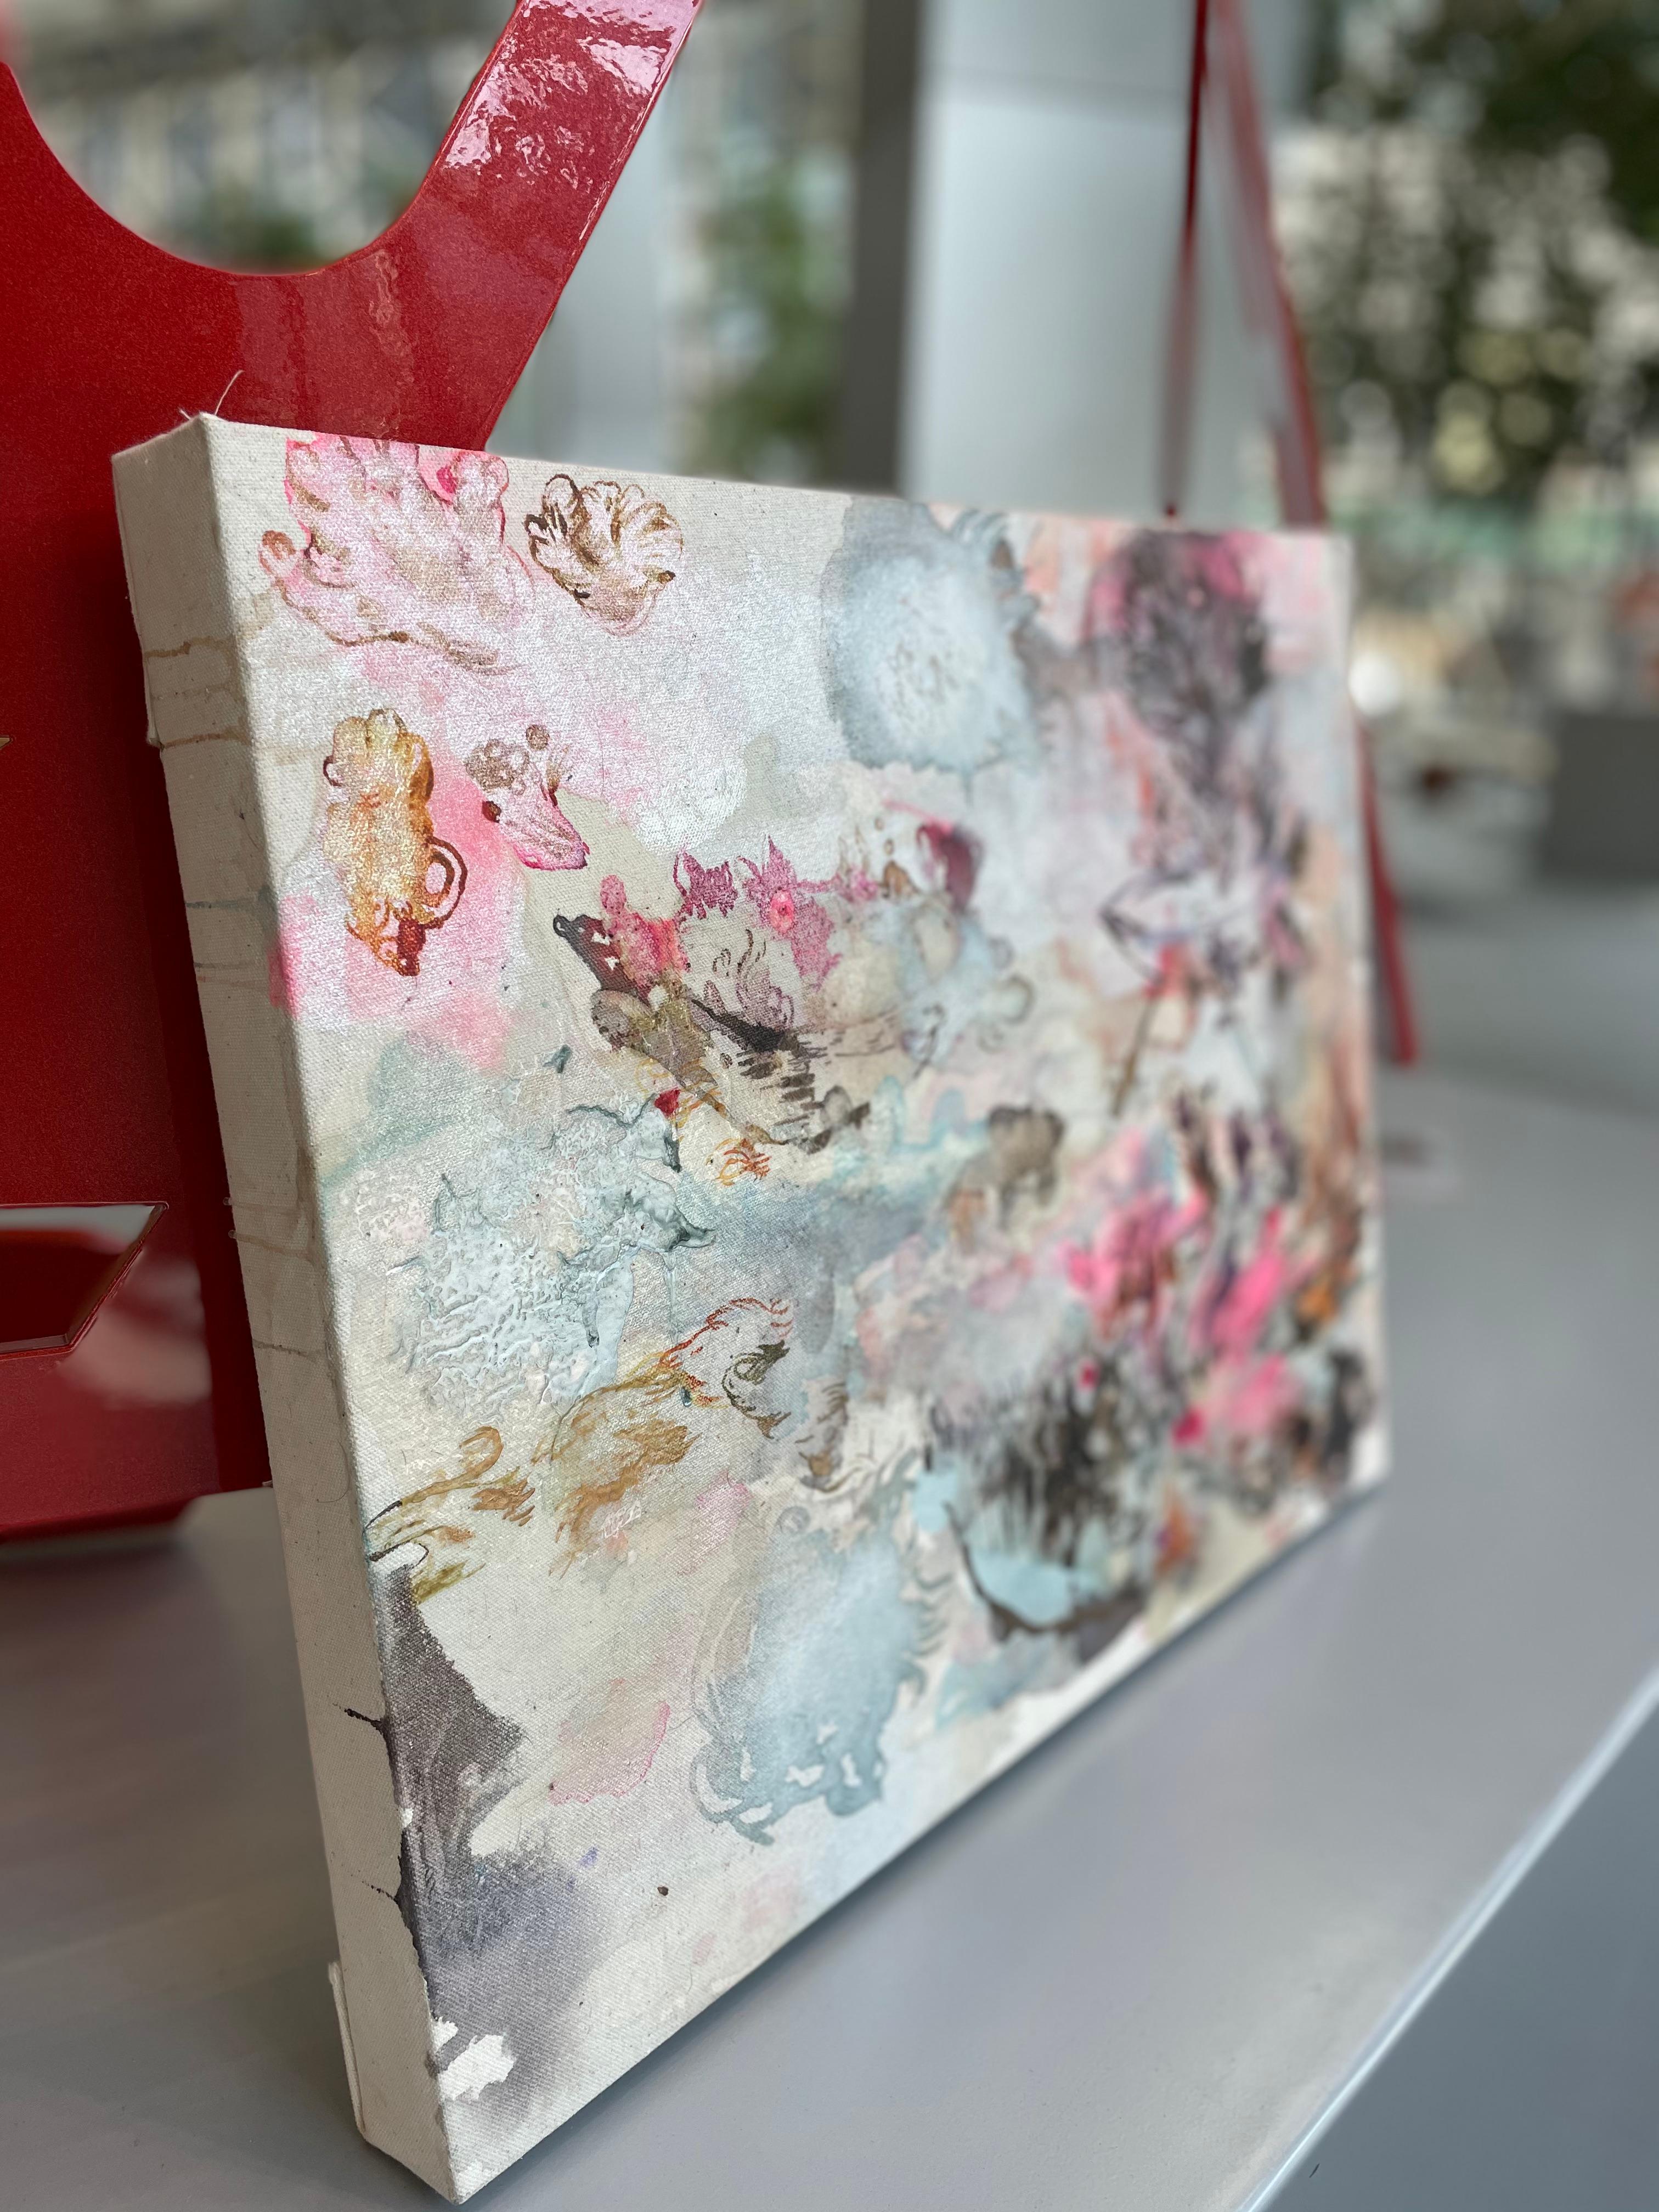 “Vessels” seems bigger than its scale. It opens to an expansive world for the viewer using diaphanous pinks and touches of silver and pearlescent, shimmering acrylic paints, resins and inks on canvas. Gently rendered vessels, as if born from shapes